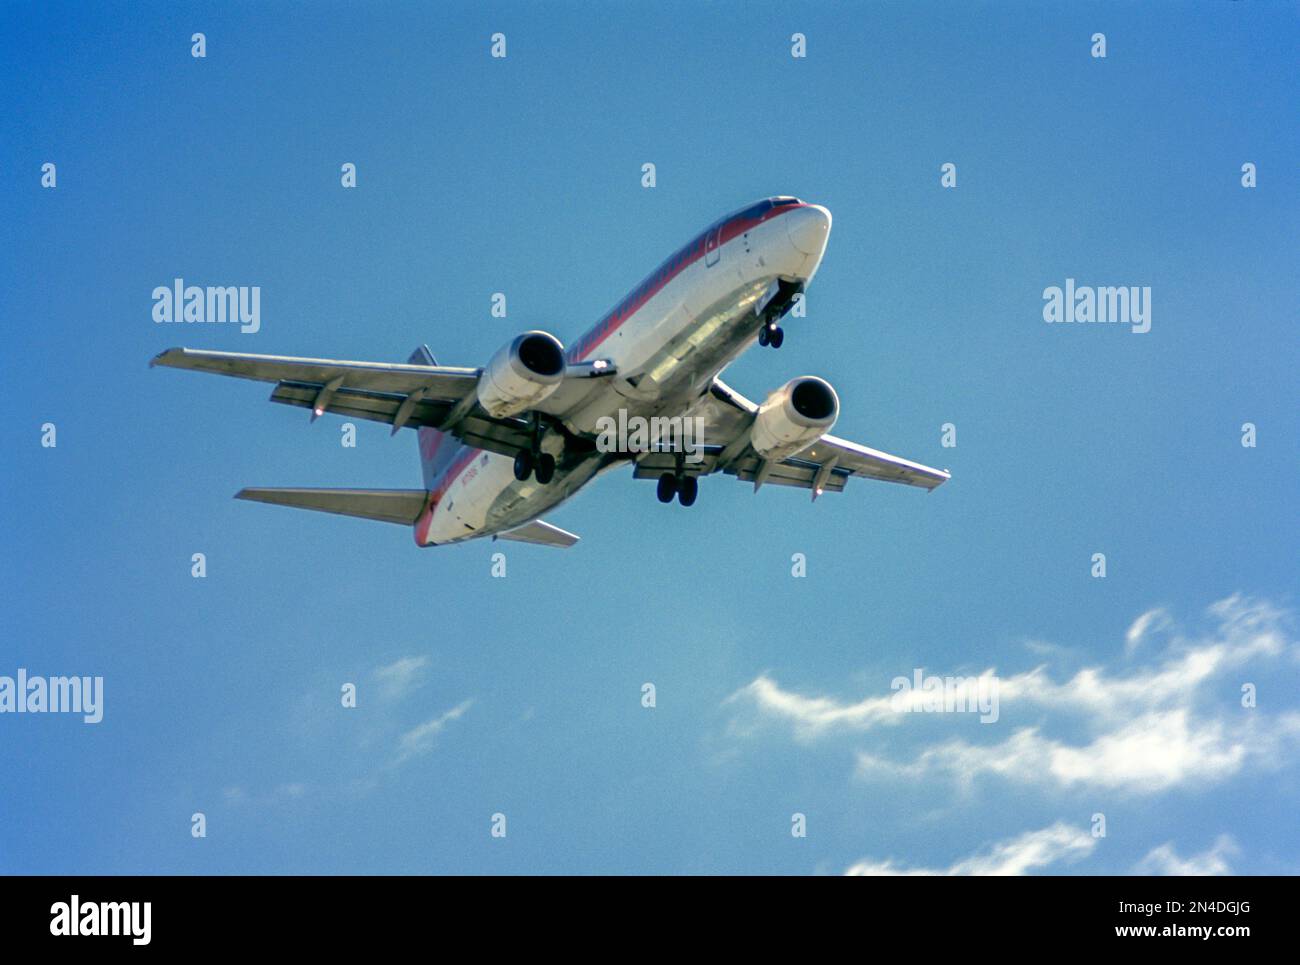 1989 HISTORICAL AIRBORNE CONTINENTAL AIRLINES  COMMERCIAL PASSENGER AIRCRAFT Stock Photo